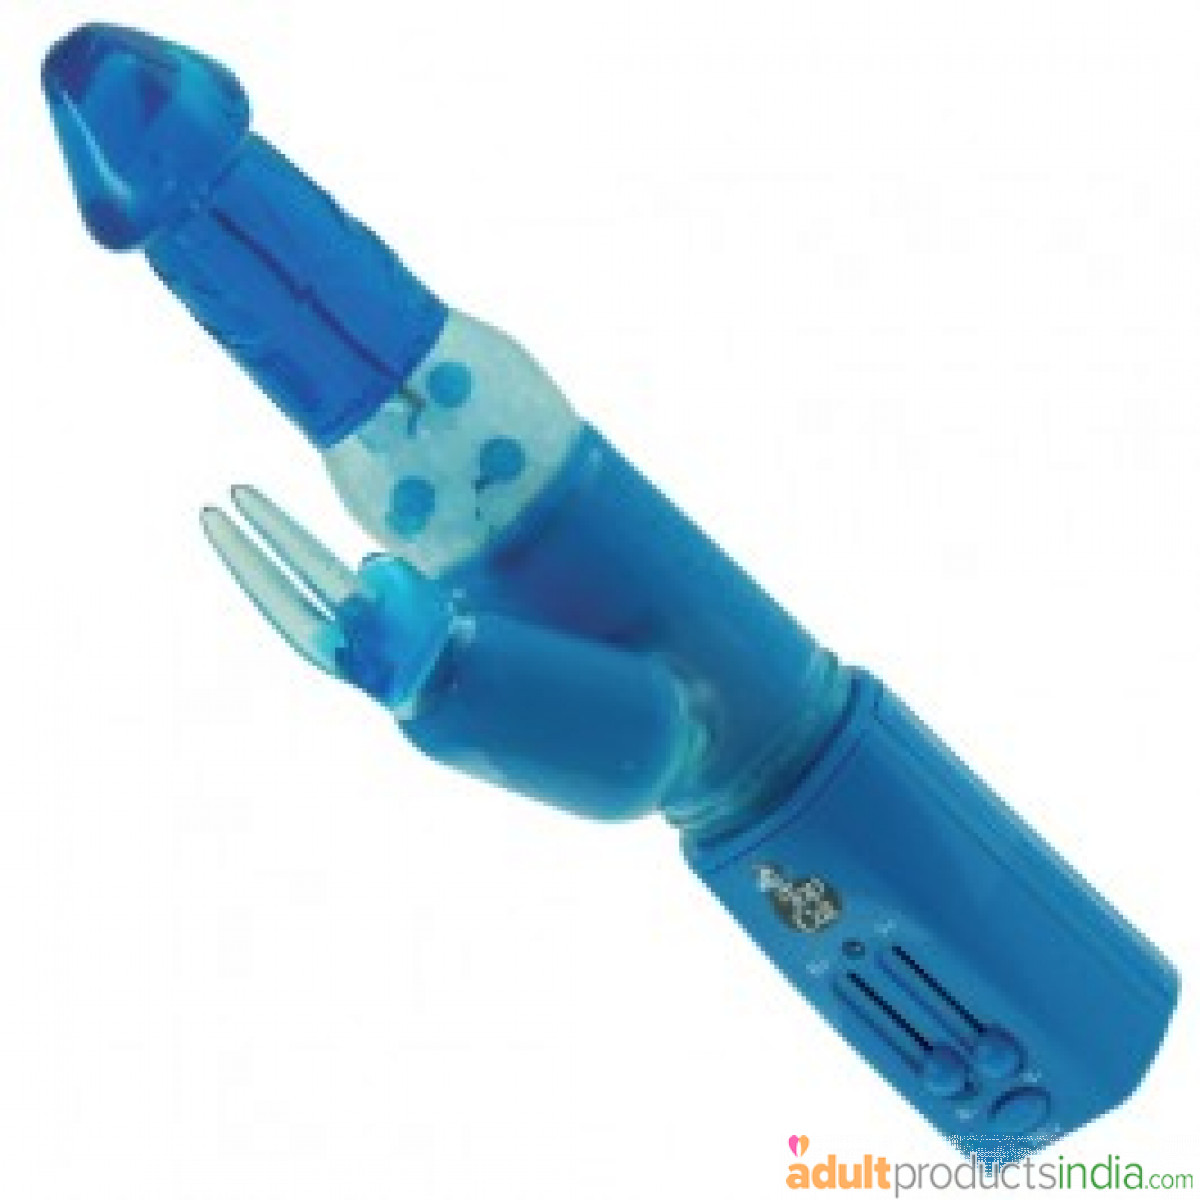 Rabbit Pearl Vibe Adult Products India